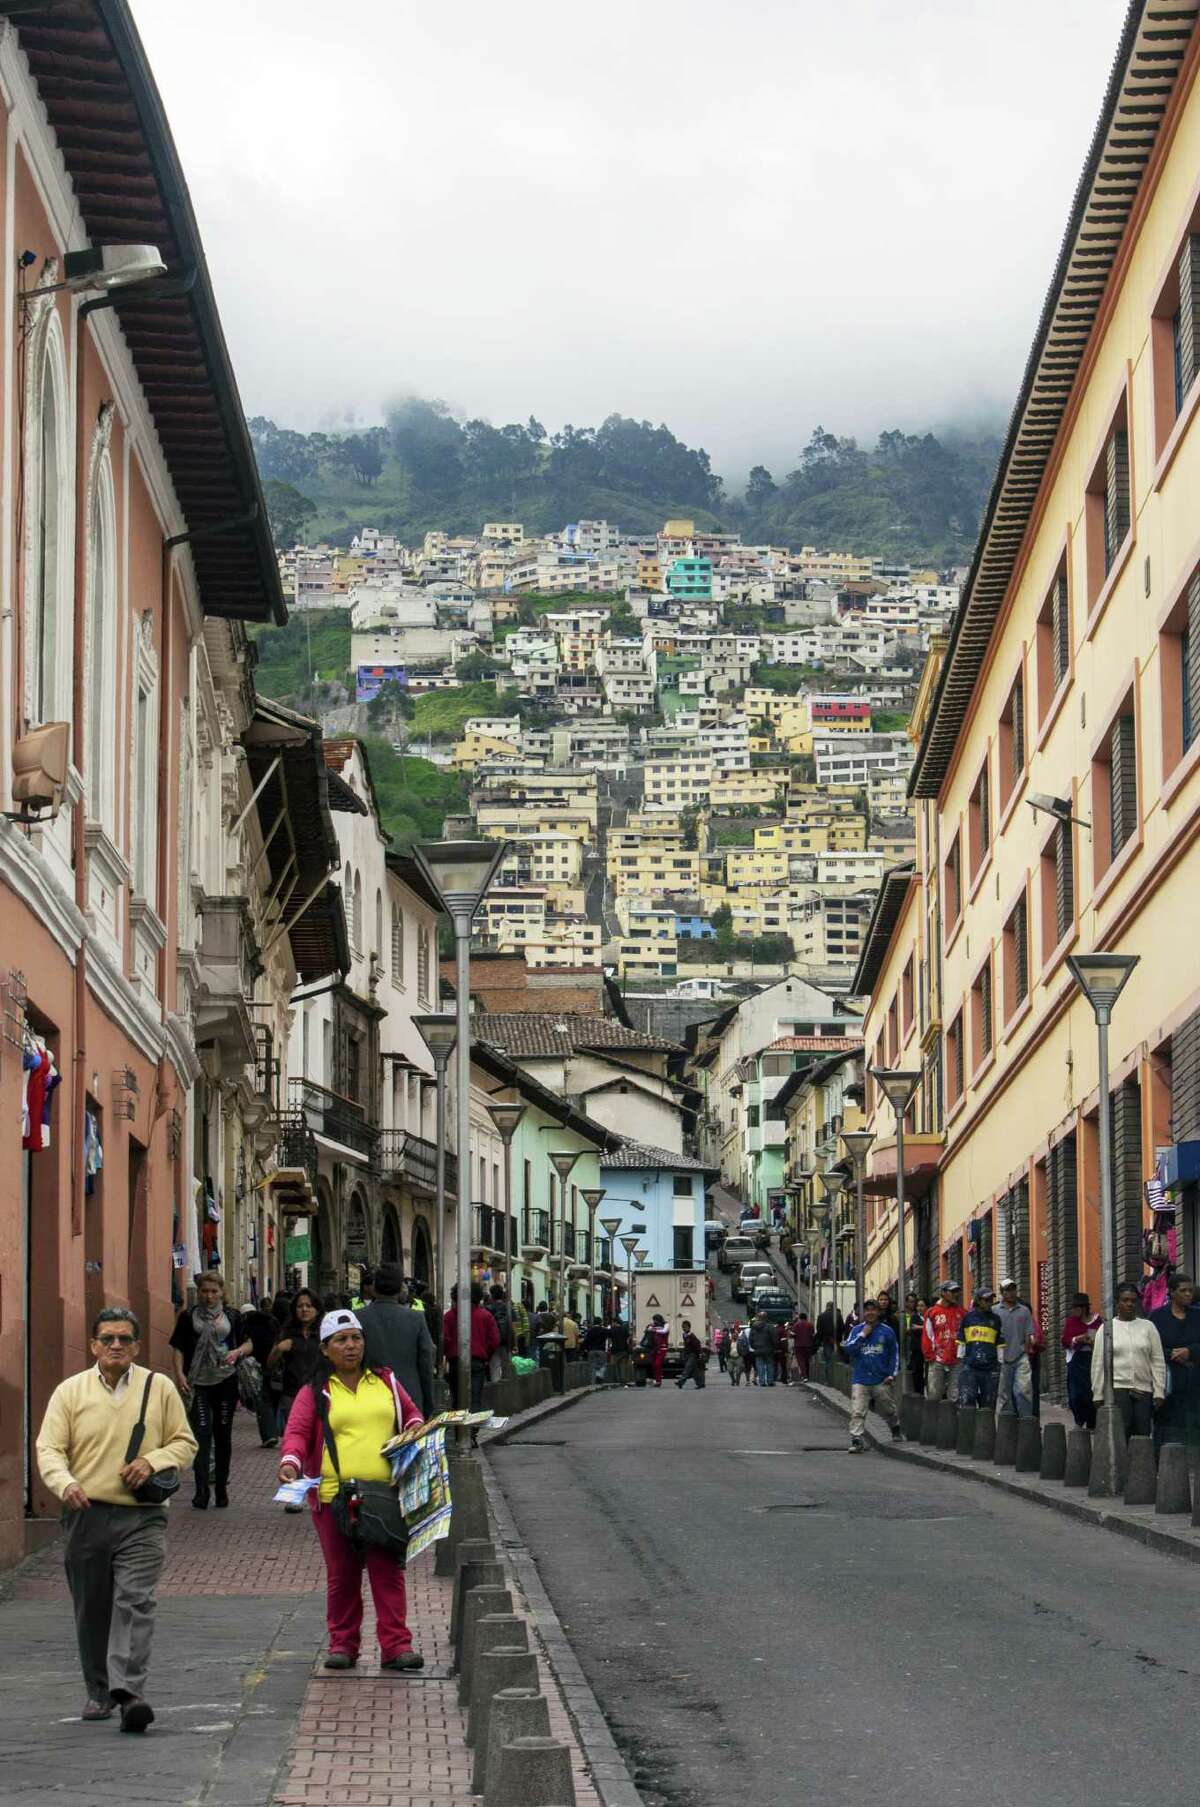 The historic center of Quito has one of the largest, least-altered ﻿historic centers in the Americas.